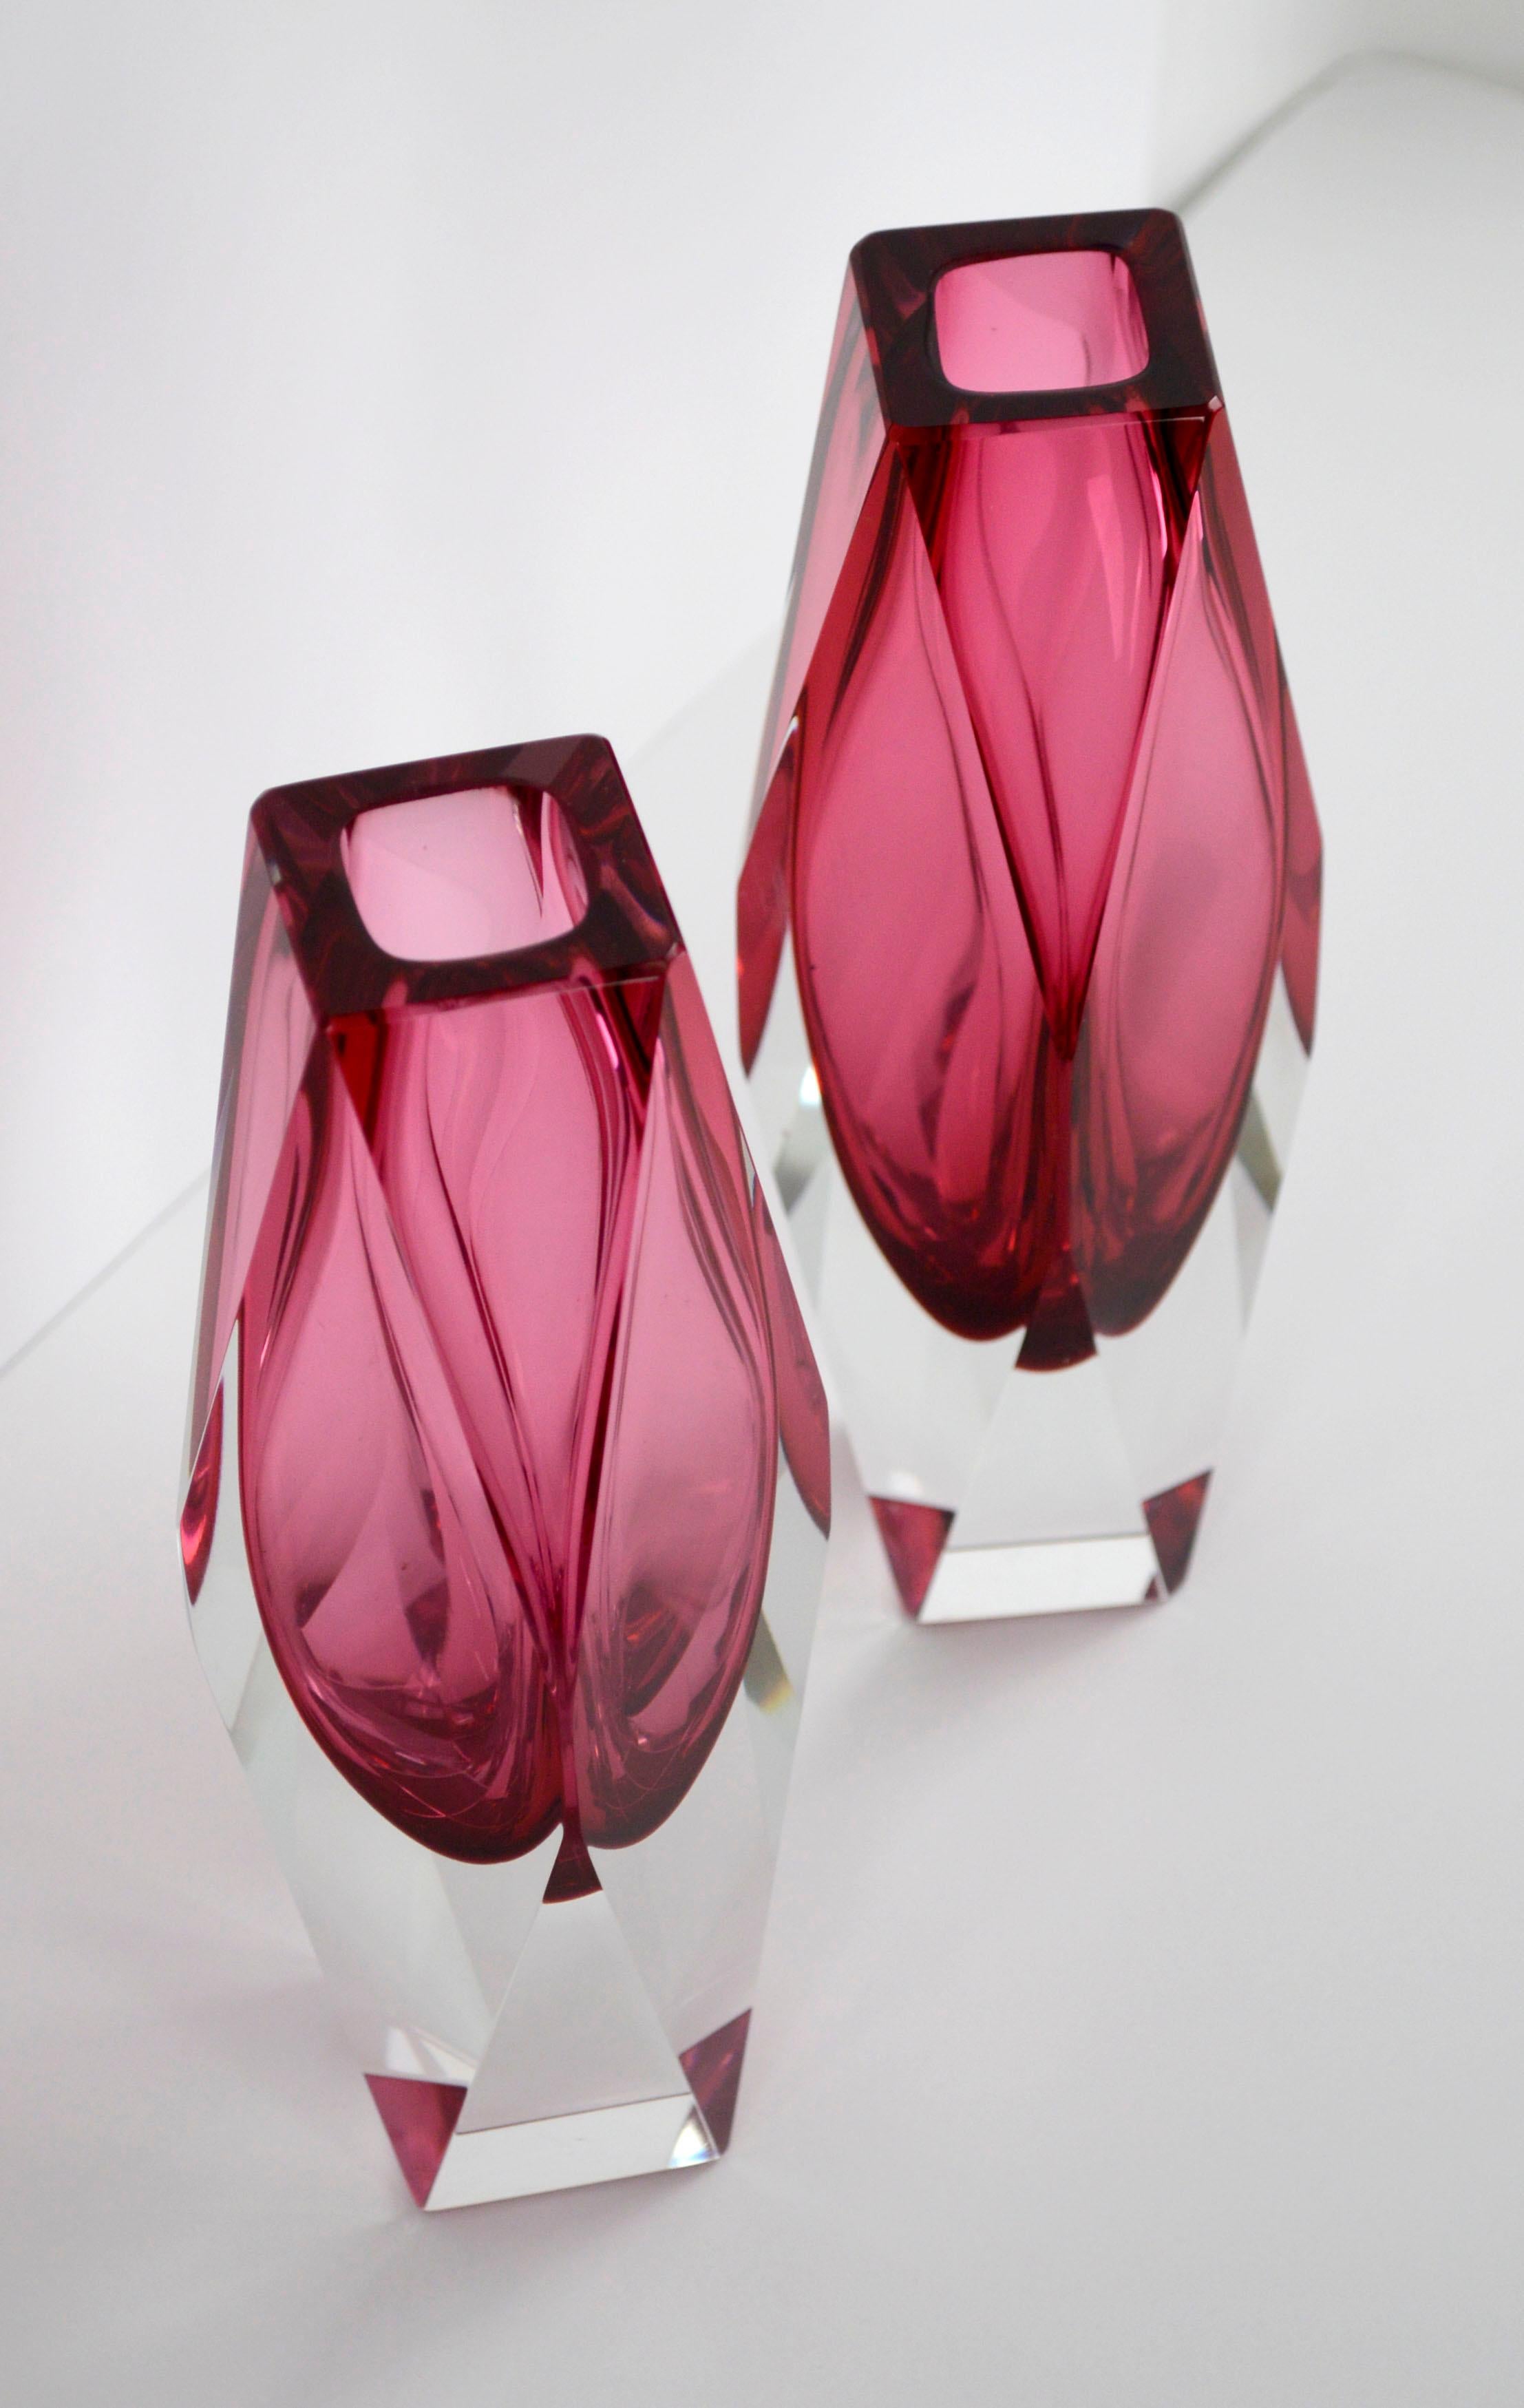 Italian Pair of Mid-Century Modern Faceted Cranberry Red Murano Candlesticks / Bud Vases